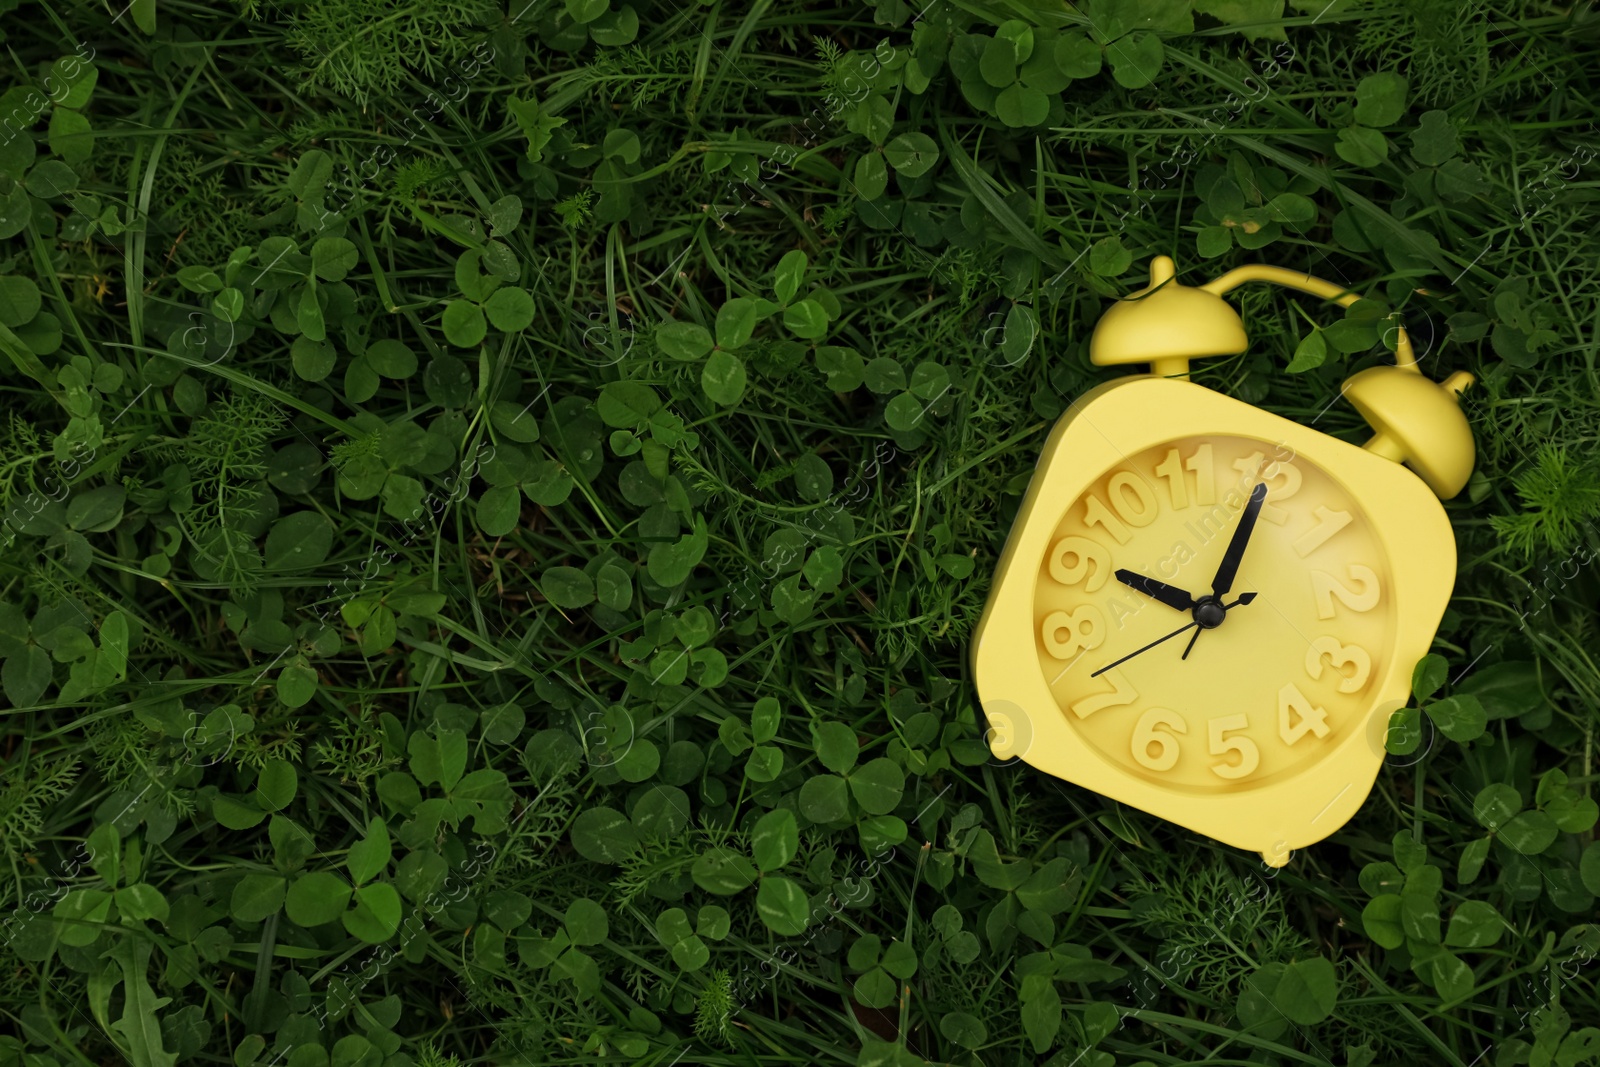 Photo of Yellow alarm clock on green grass outdoors, top view. Space for text